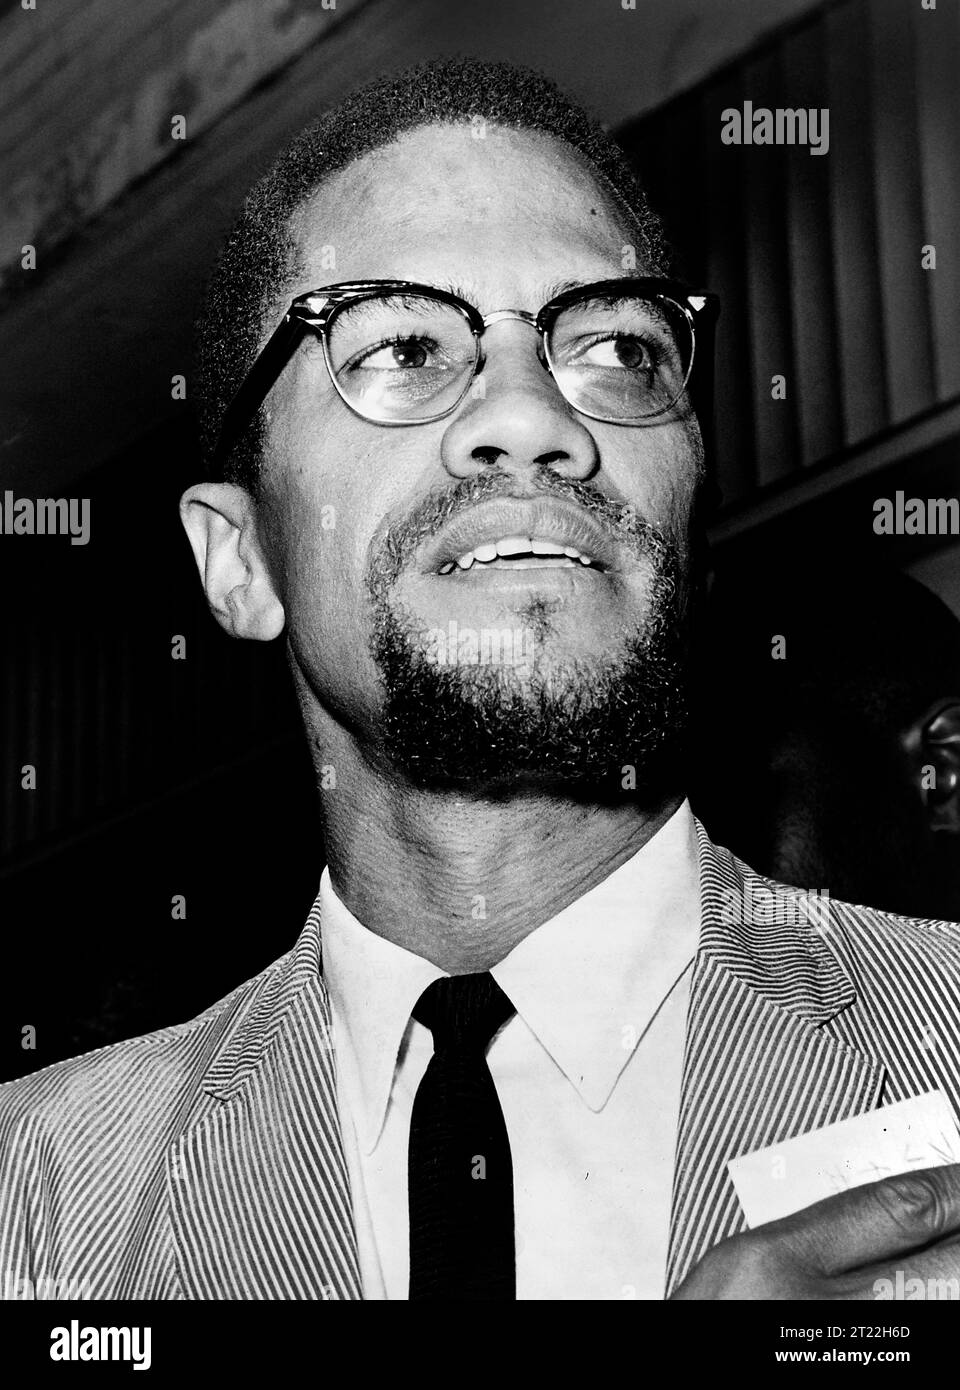 Malcolm X (1925-1965), American Muslim minister and human rights activist, head and shoulders portrait, Queens County Courthouse, Queens, New York City, New York, USA, Herman Hiller, New York World-Telegram and the Sun Newspaper Photograph Collection, 1964 Stock Photo